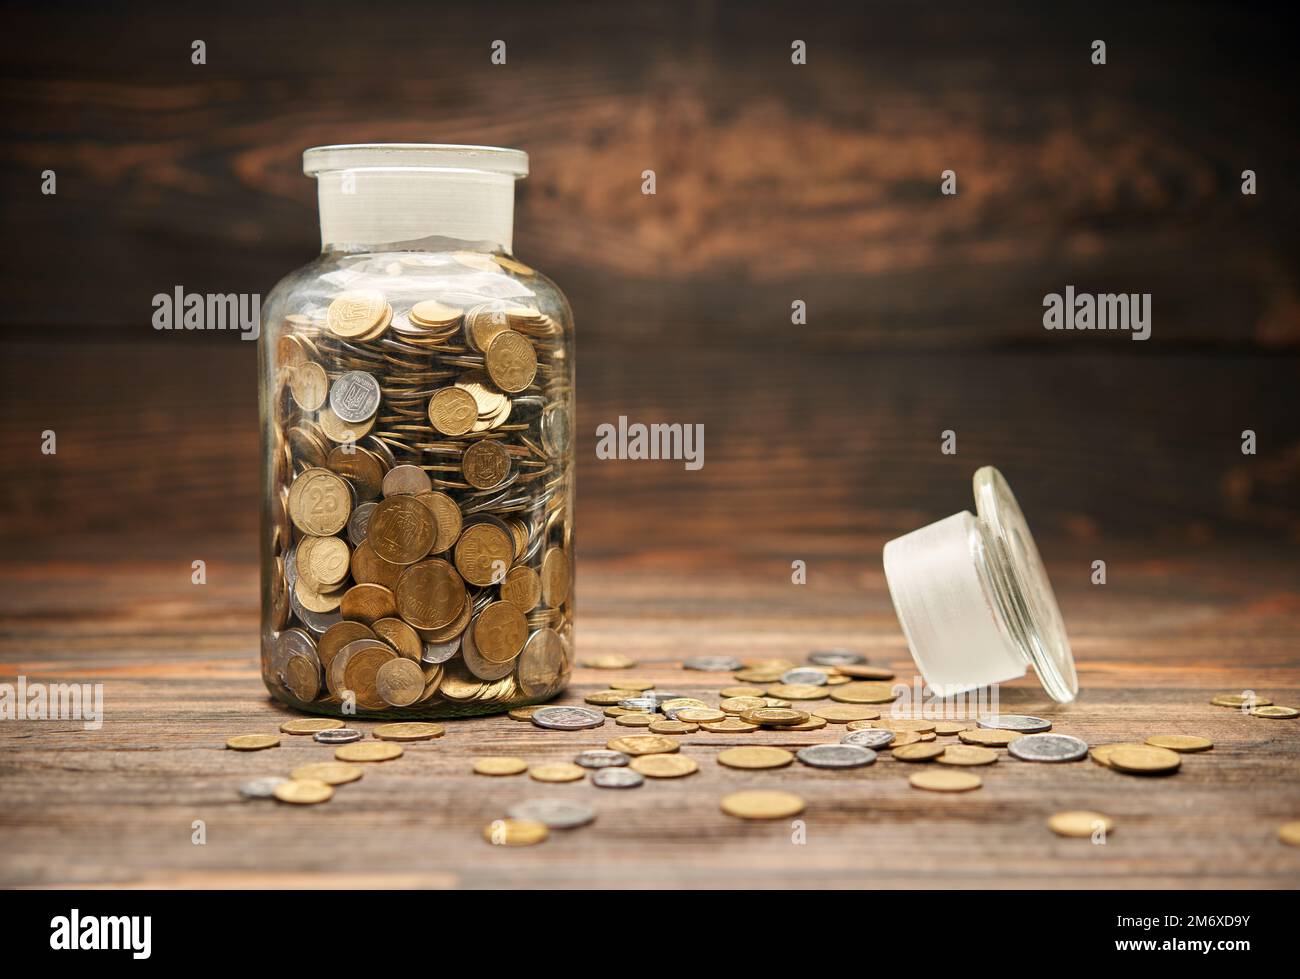 Glass jar filled of golden coins Stock Photo